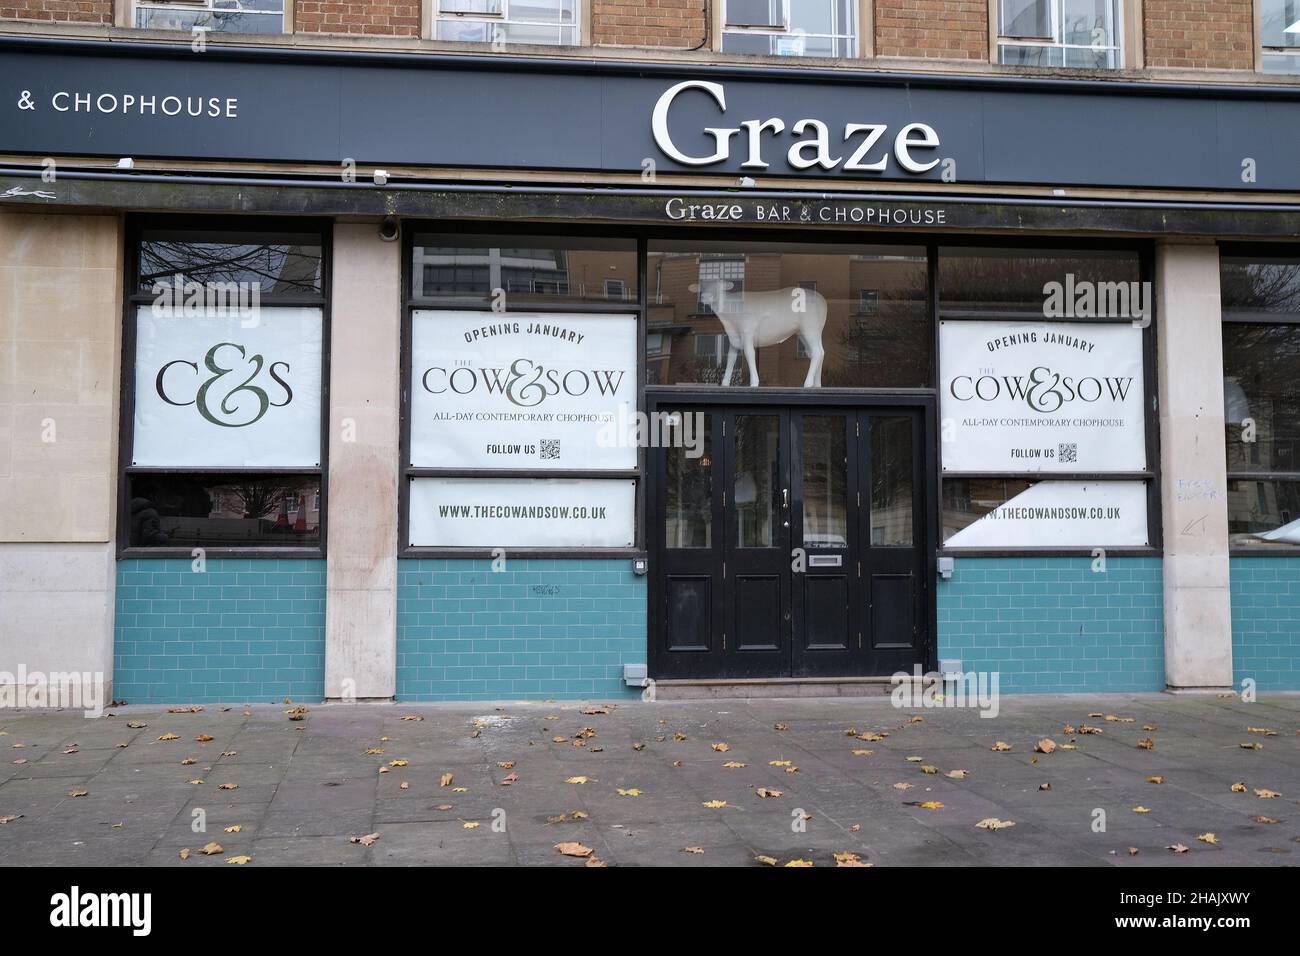 December 2021 - The now closed Graze restaurant in Bristol, England, UK. going to reopen as the Cow & Sow Stock Photo